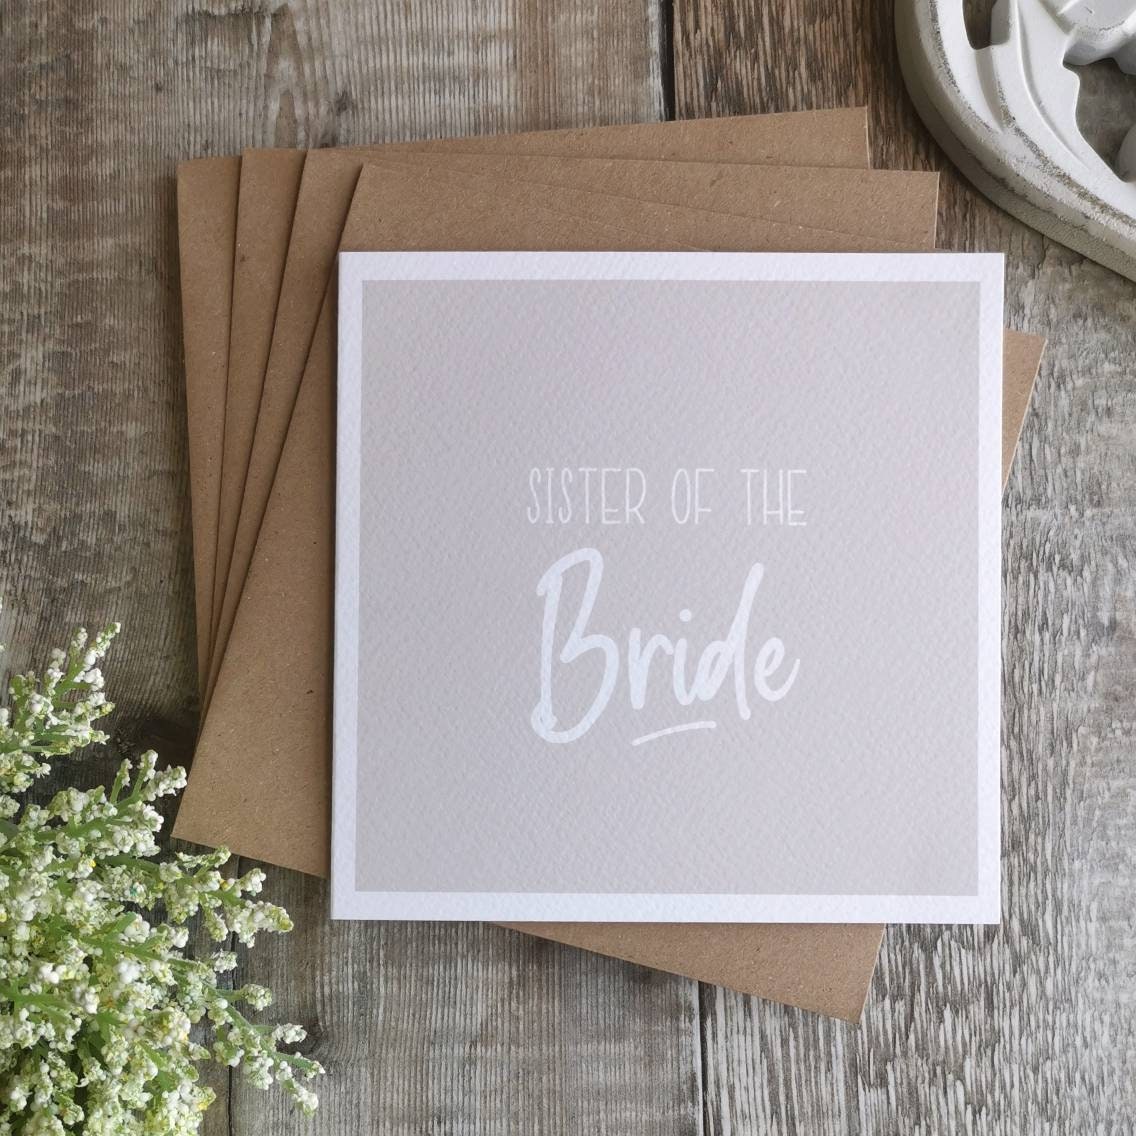 Sister Or Brother Of The Bride Wedding Greeting Card. Beige-Grey, Neutral, Modern, Natural, Minimalist